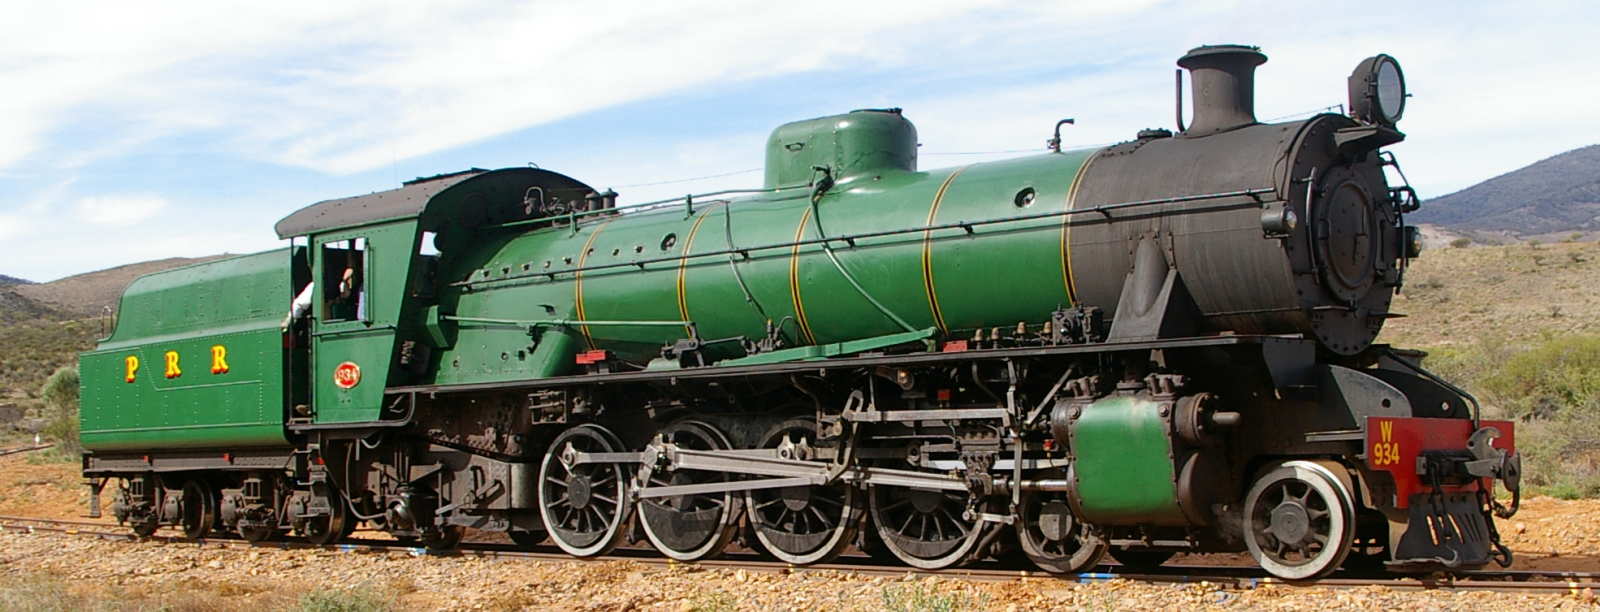 W934 in April 2012 at Woolshed Flat